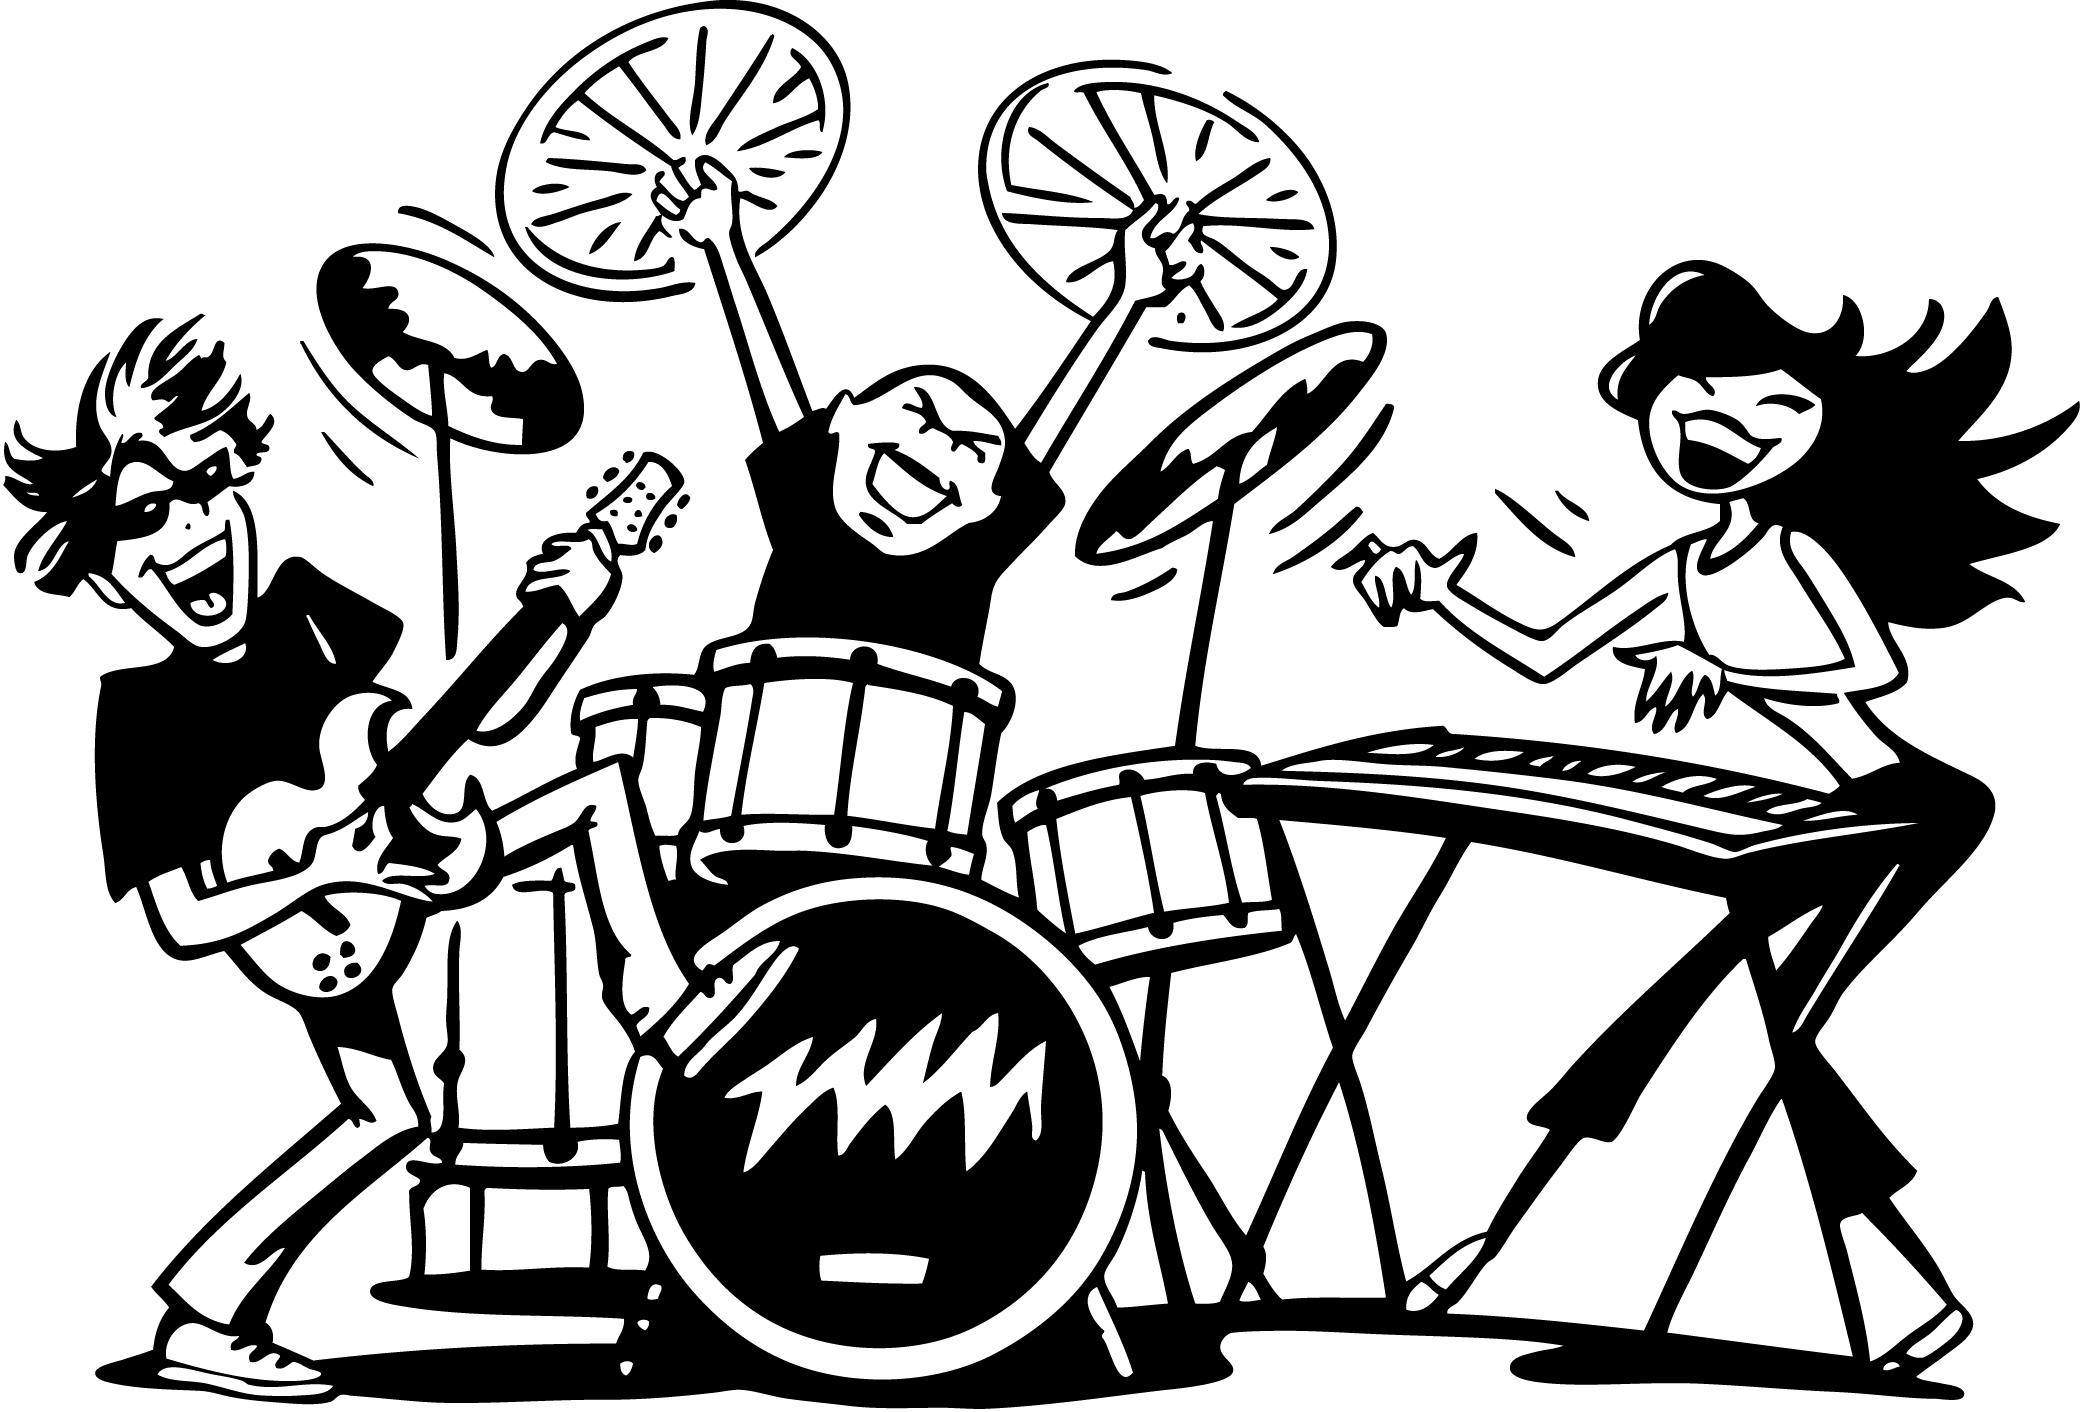 Band clipart cartoon, Band cartoon Transparent FREE for download on